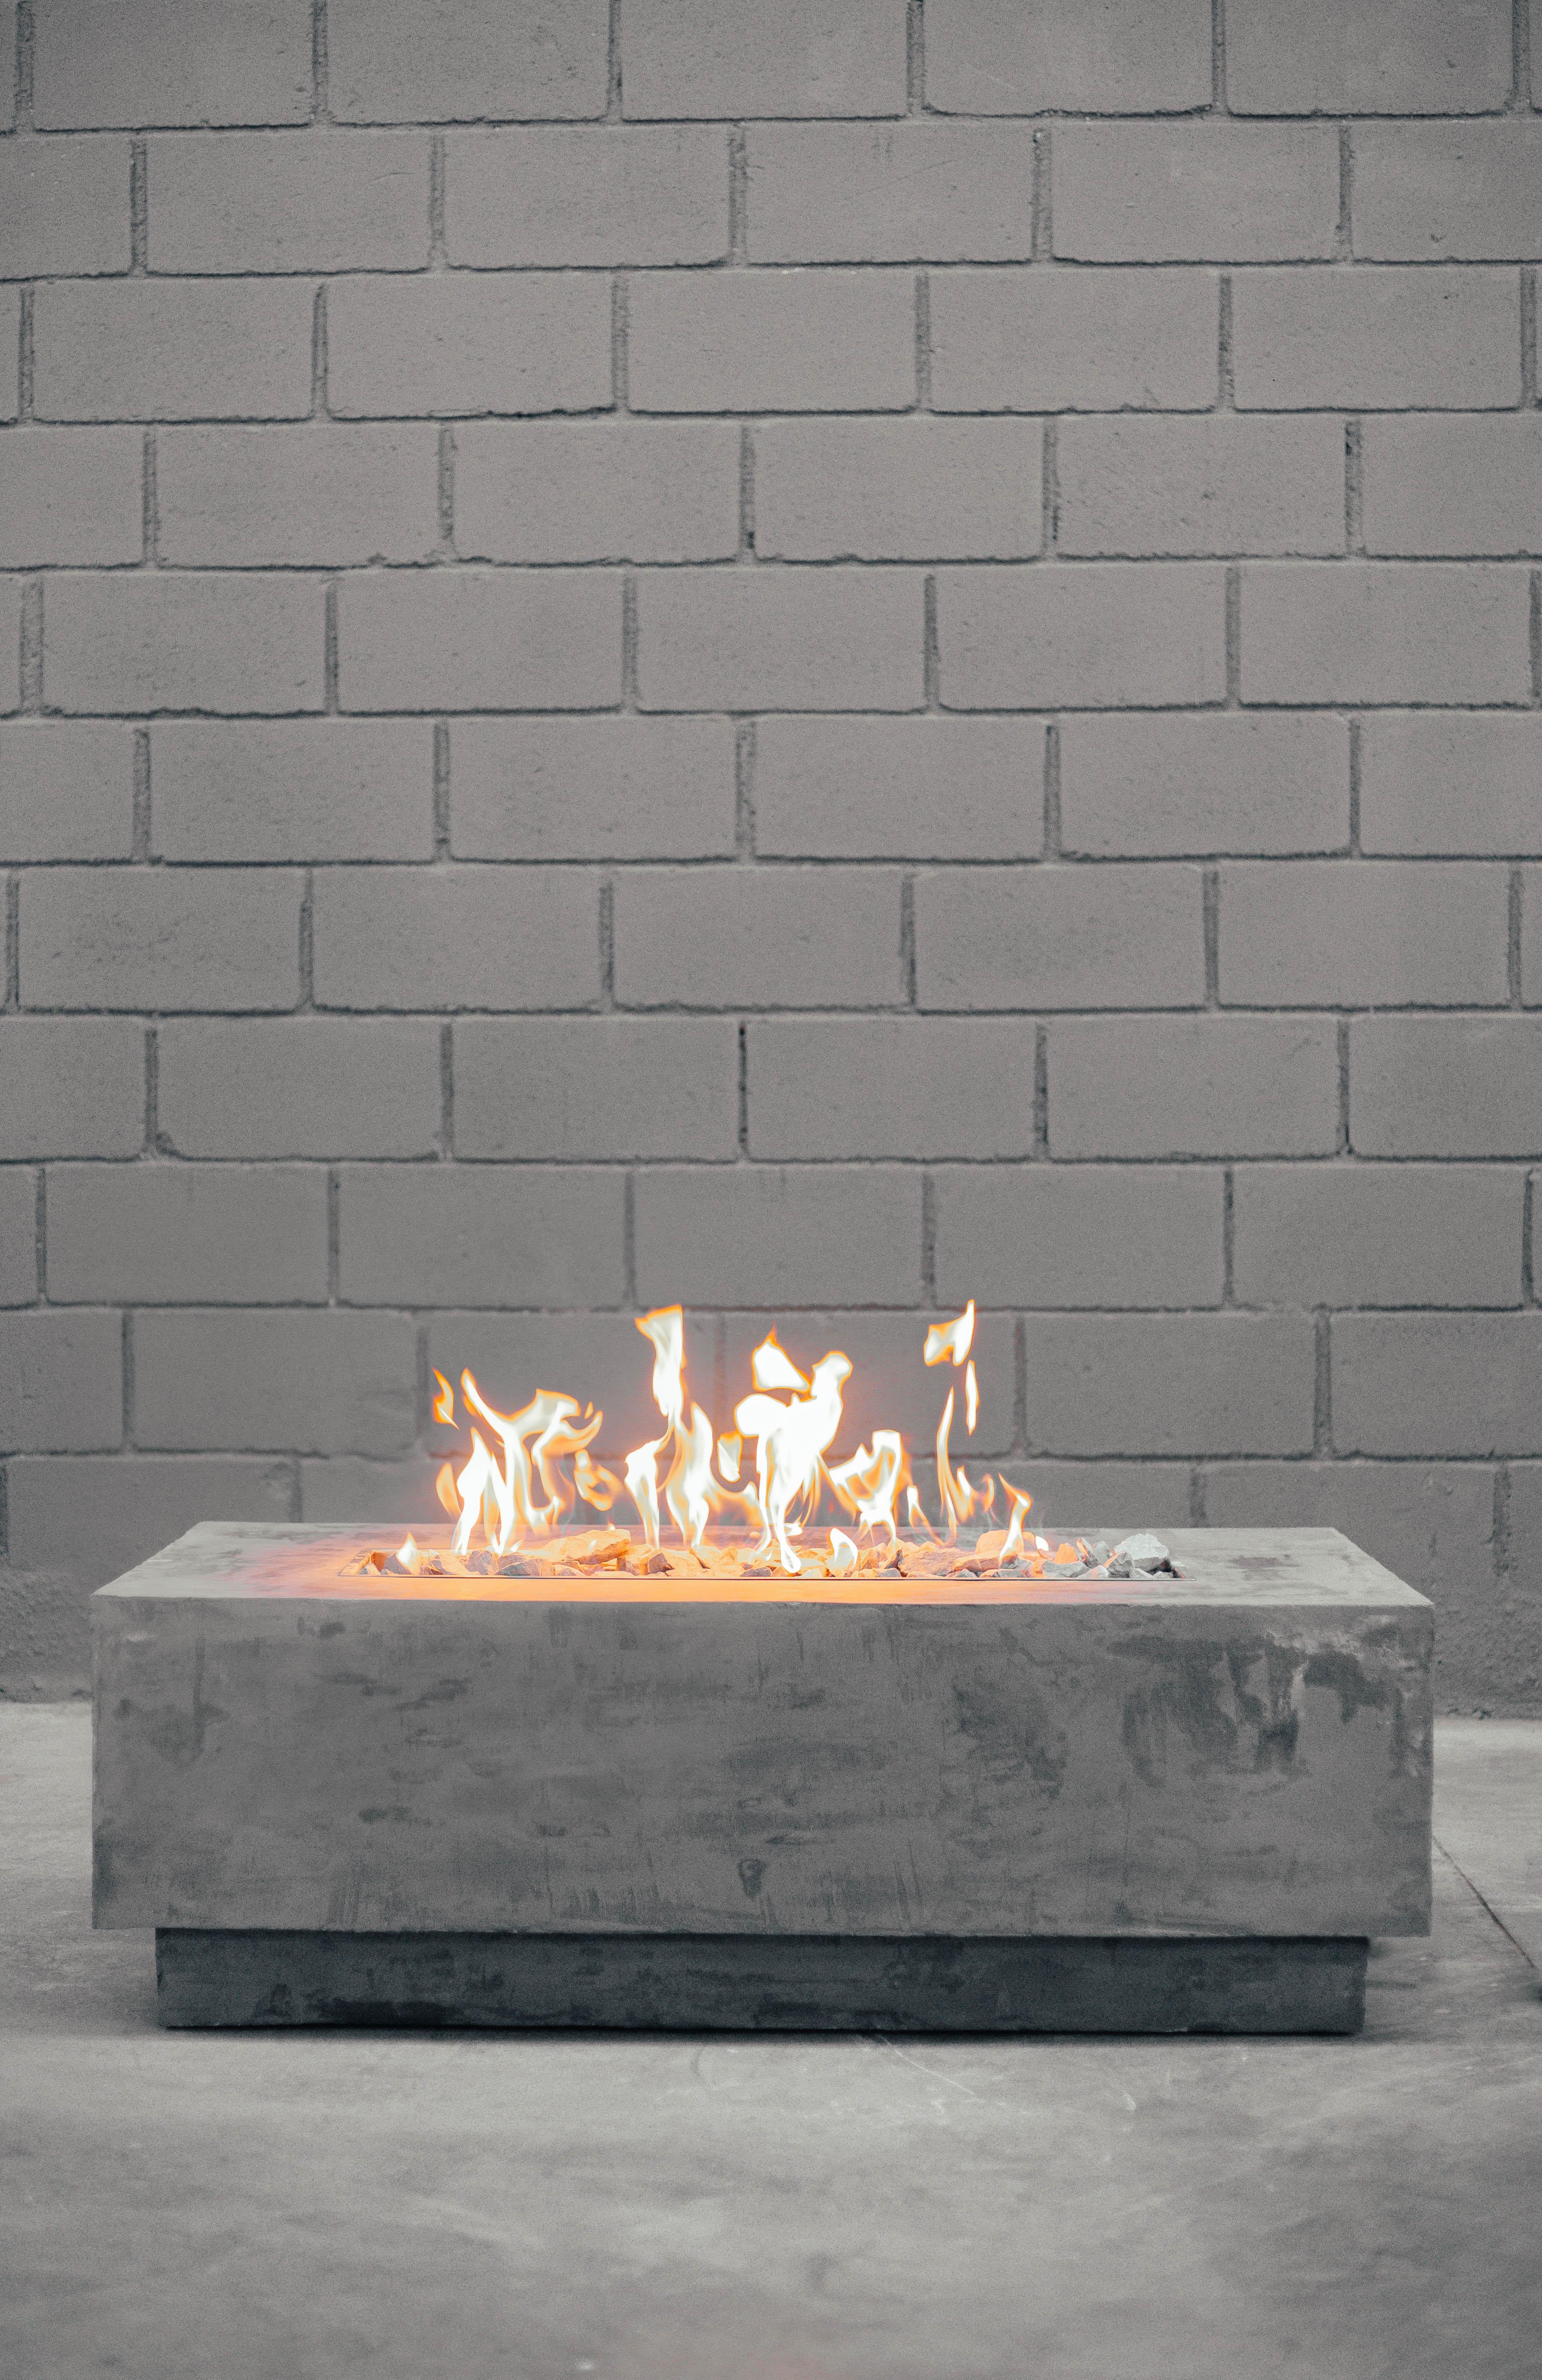 Bali Dos fire table by Andres Monnier
Dimensions: 120 x 60cm x H 45cm
Materials: stainless steel. Lightweight concrete.
Technique: Polished stainless steel. Polished concrete.

The design of the Concretus Collection handmade concrete pieces.